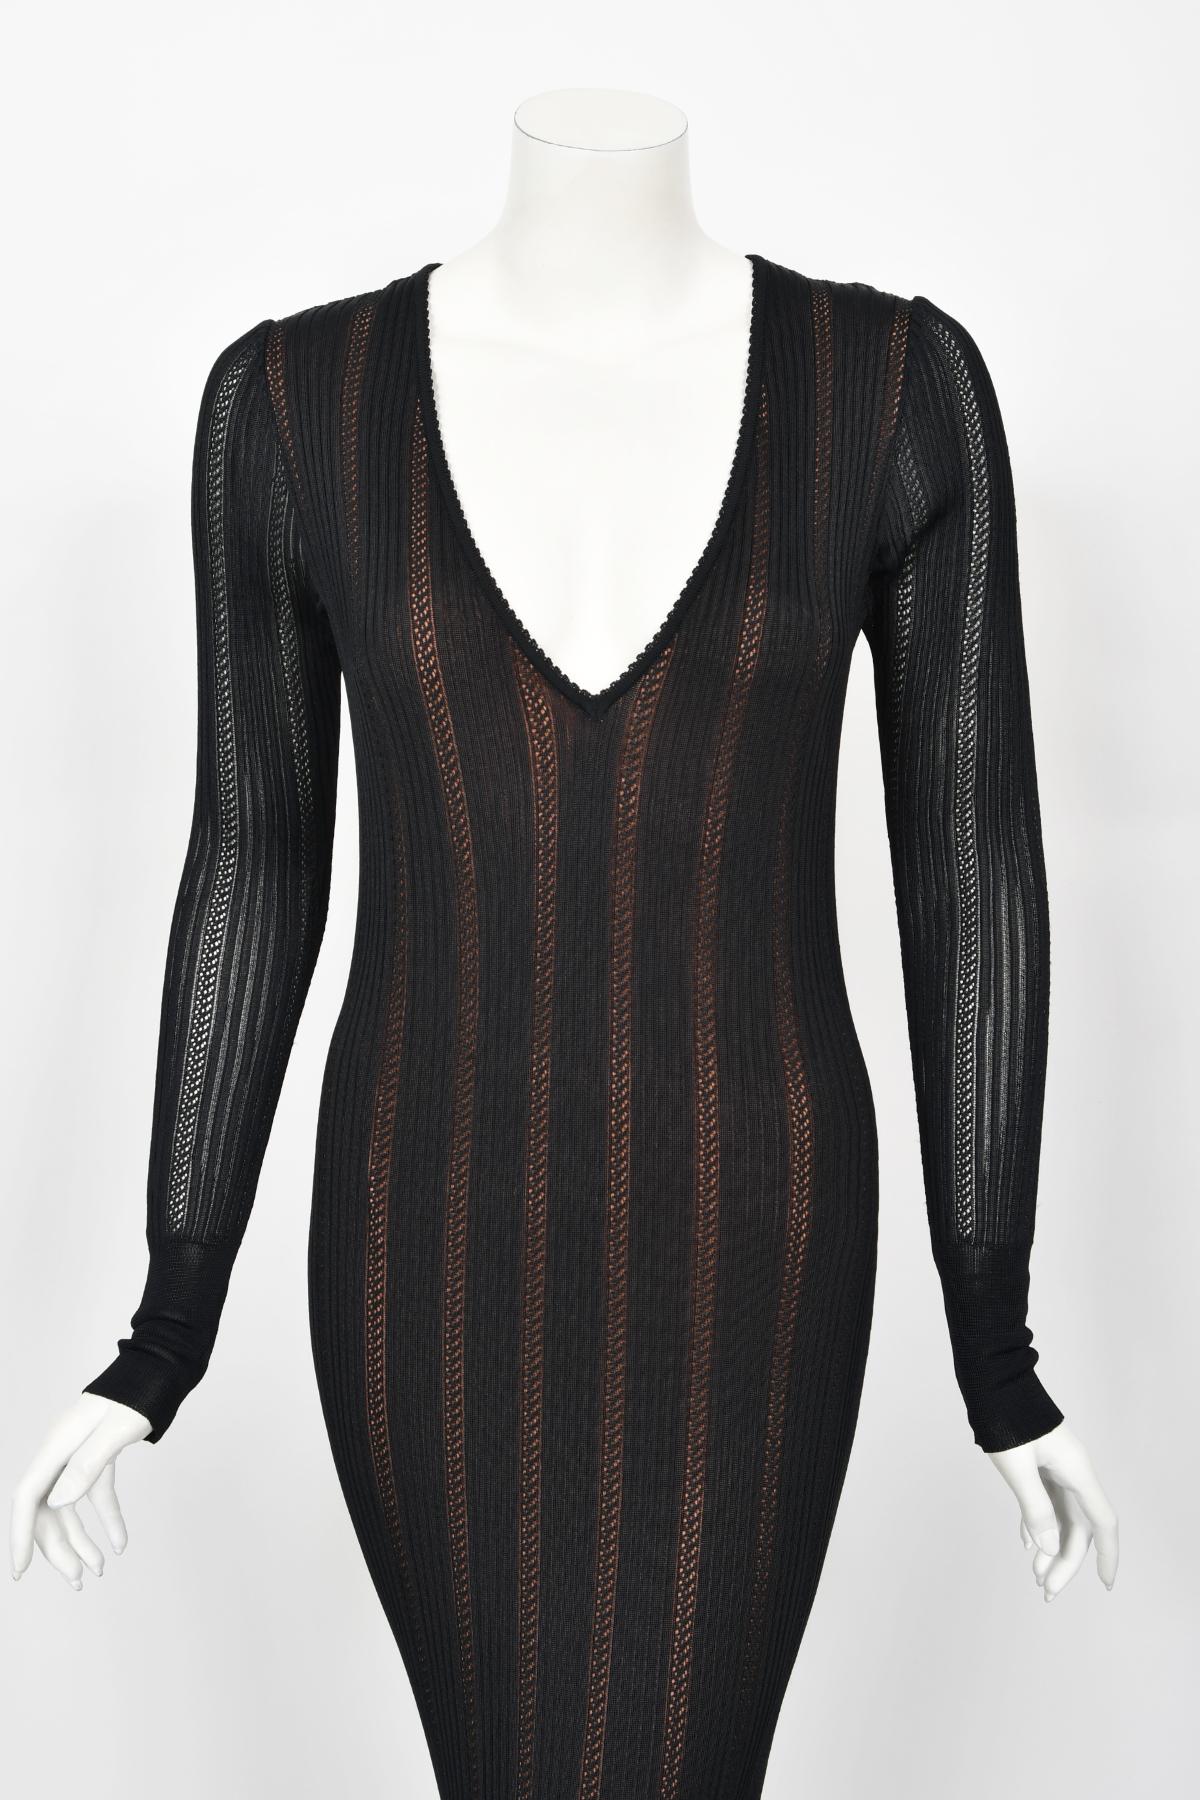 1996 Azzedine Alaia Documented Rare Nude Illusion Knit Bodycon Floor Length Gown In Good Condition For Sale In Beverly Hills, CA